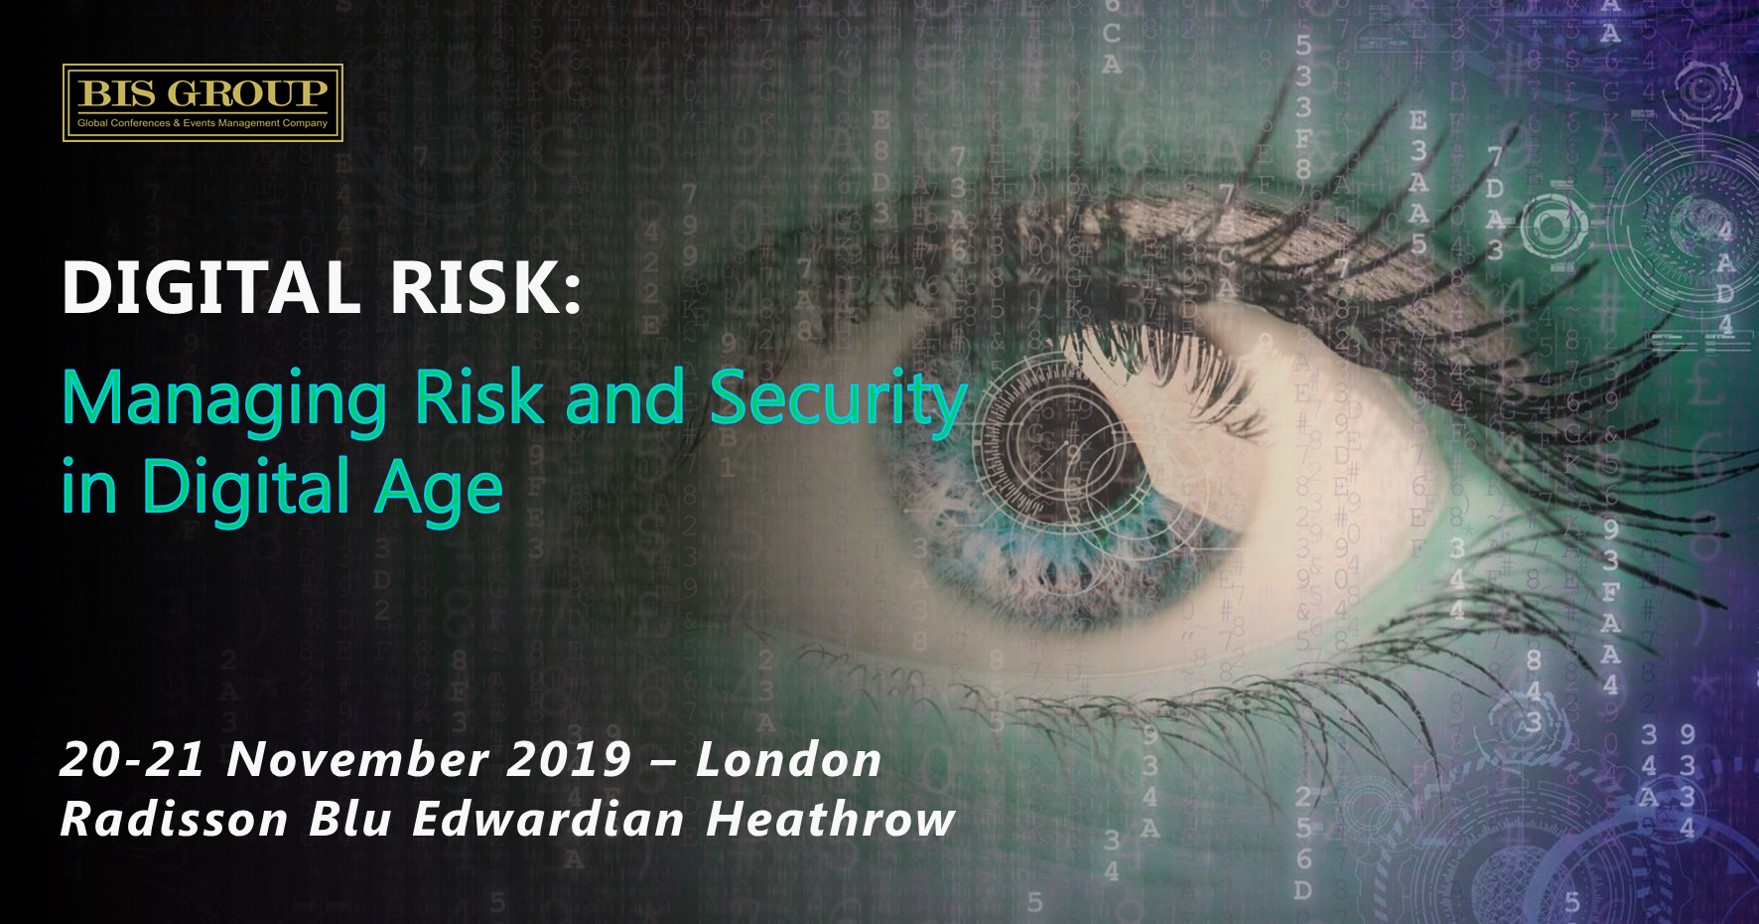 Digital Risk: Managing Risk and Security in Digital Age organized by BIS Group